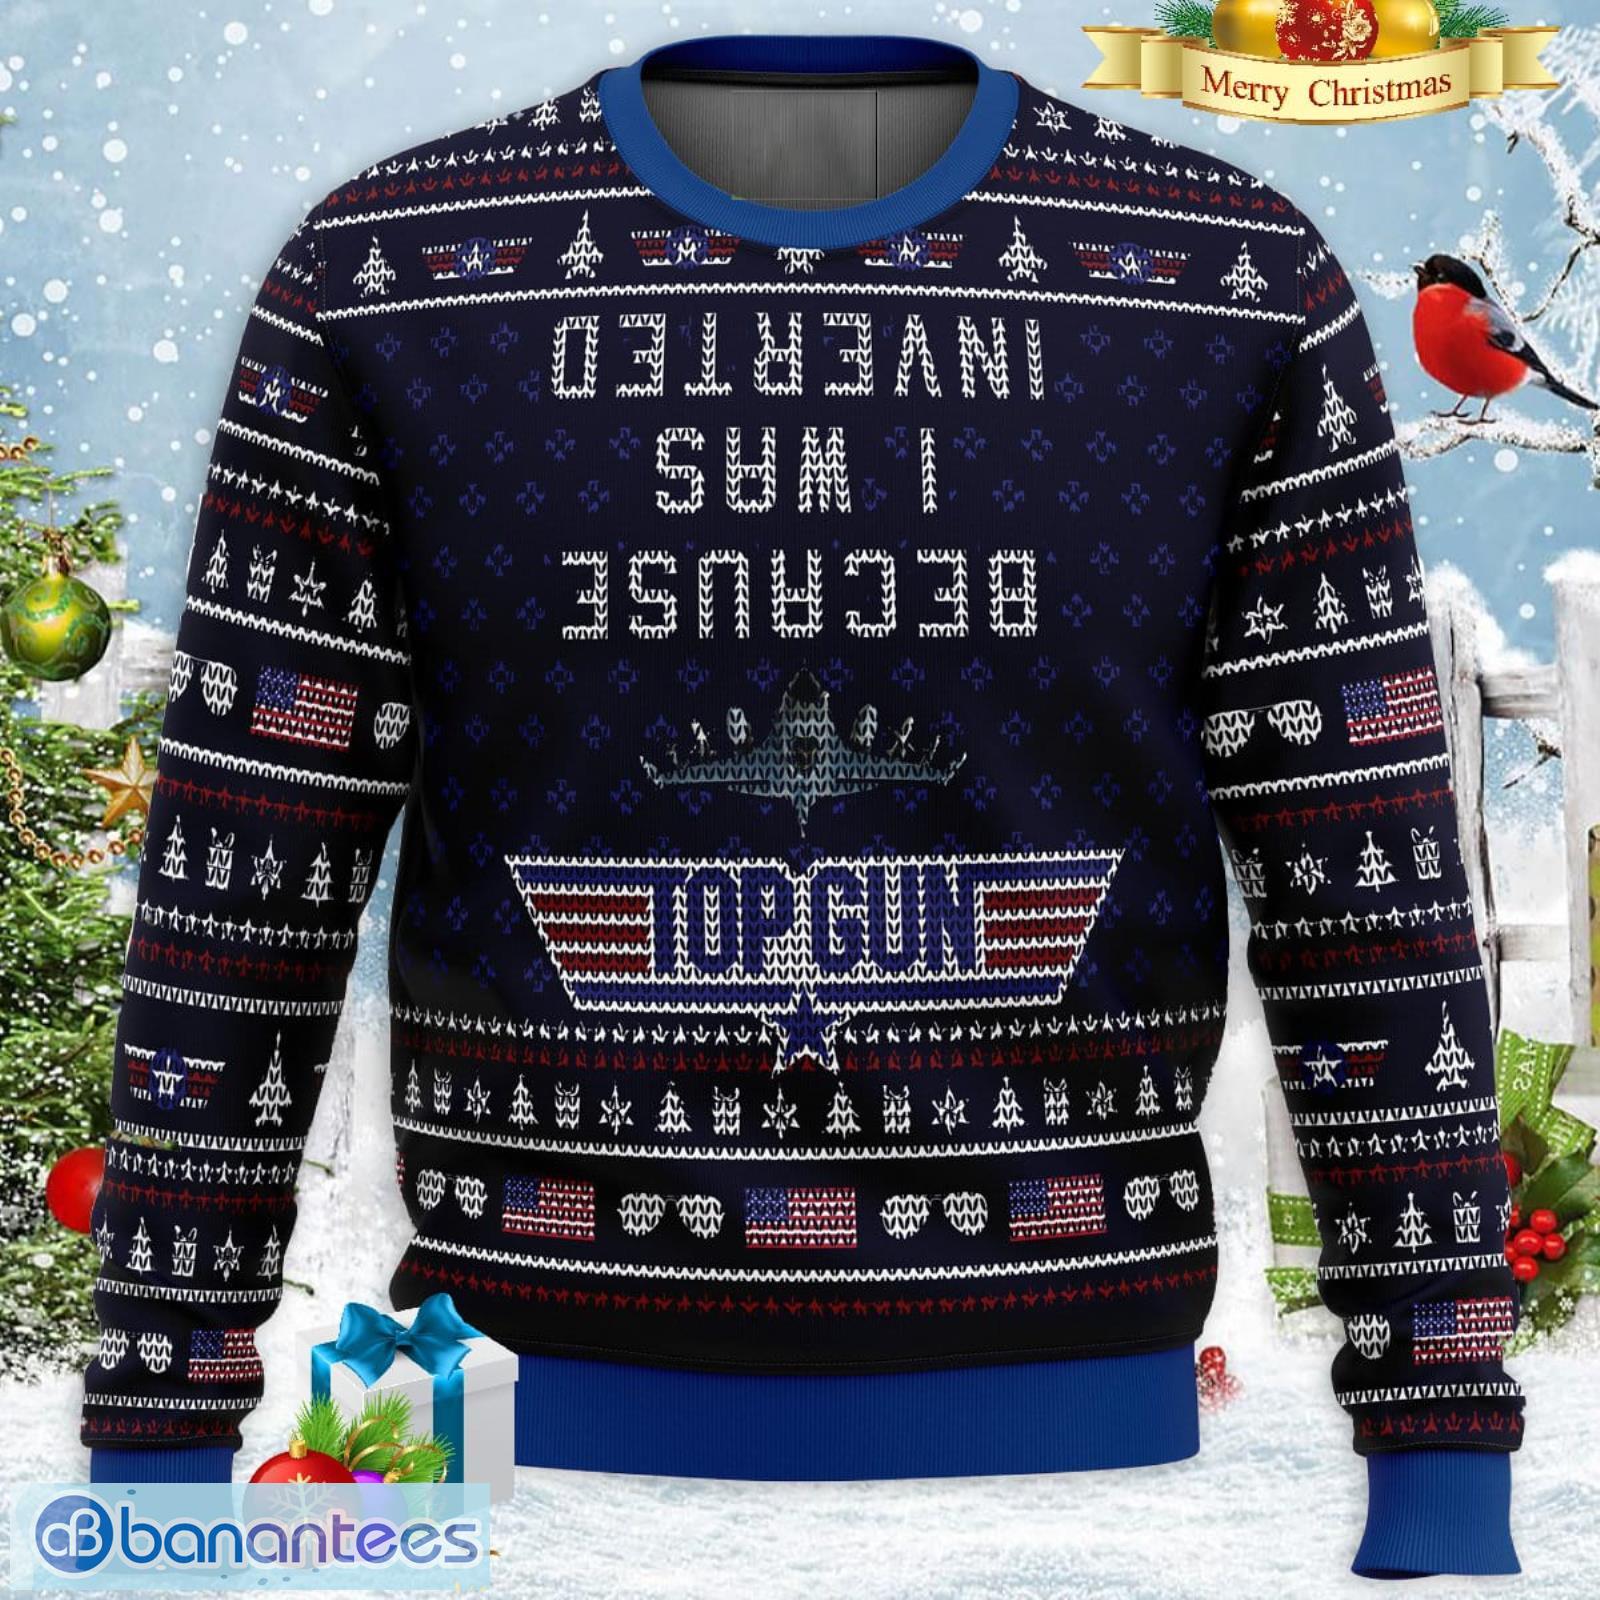 Star Trek Ugly Christmas Sweater Inexpensive Gift - Personalized Gifts:  Family, Sports, Occasions, Trending